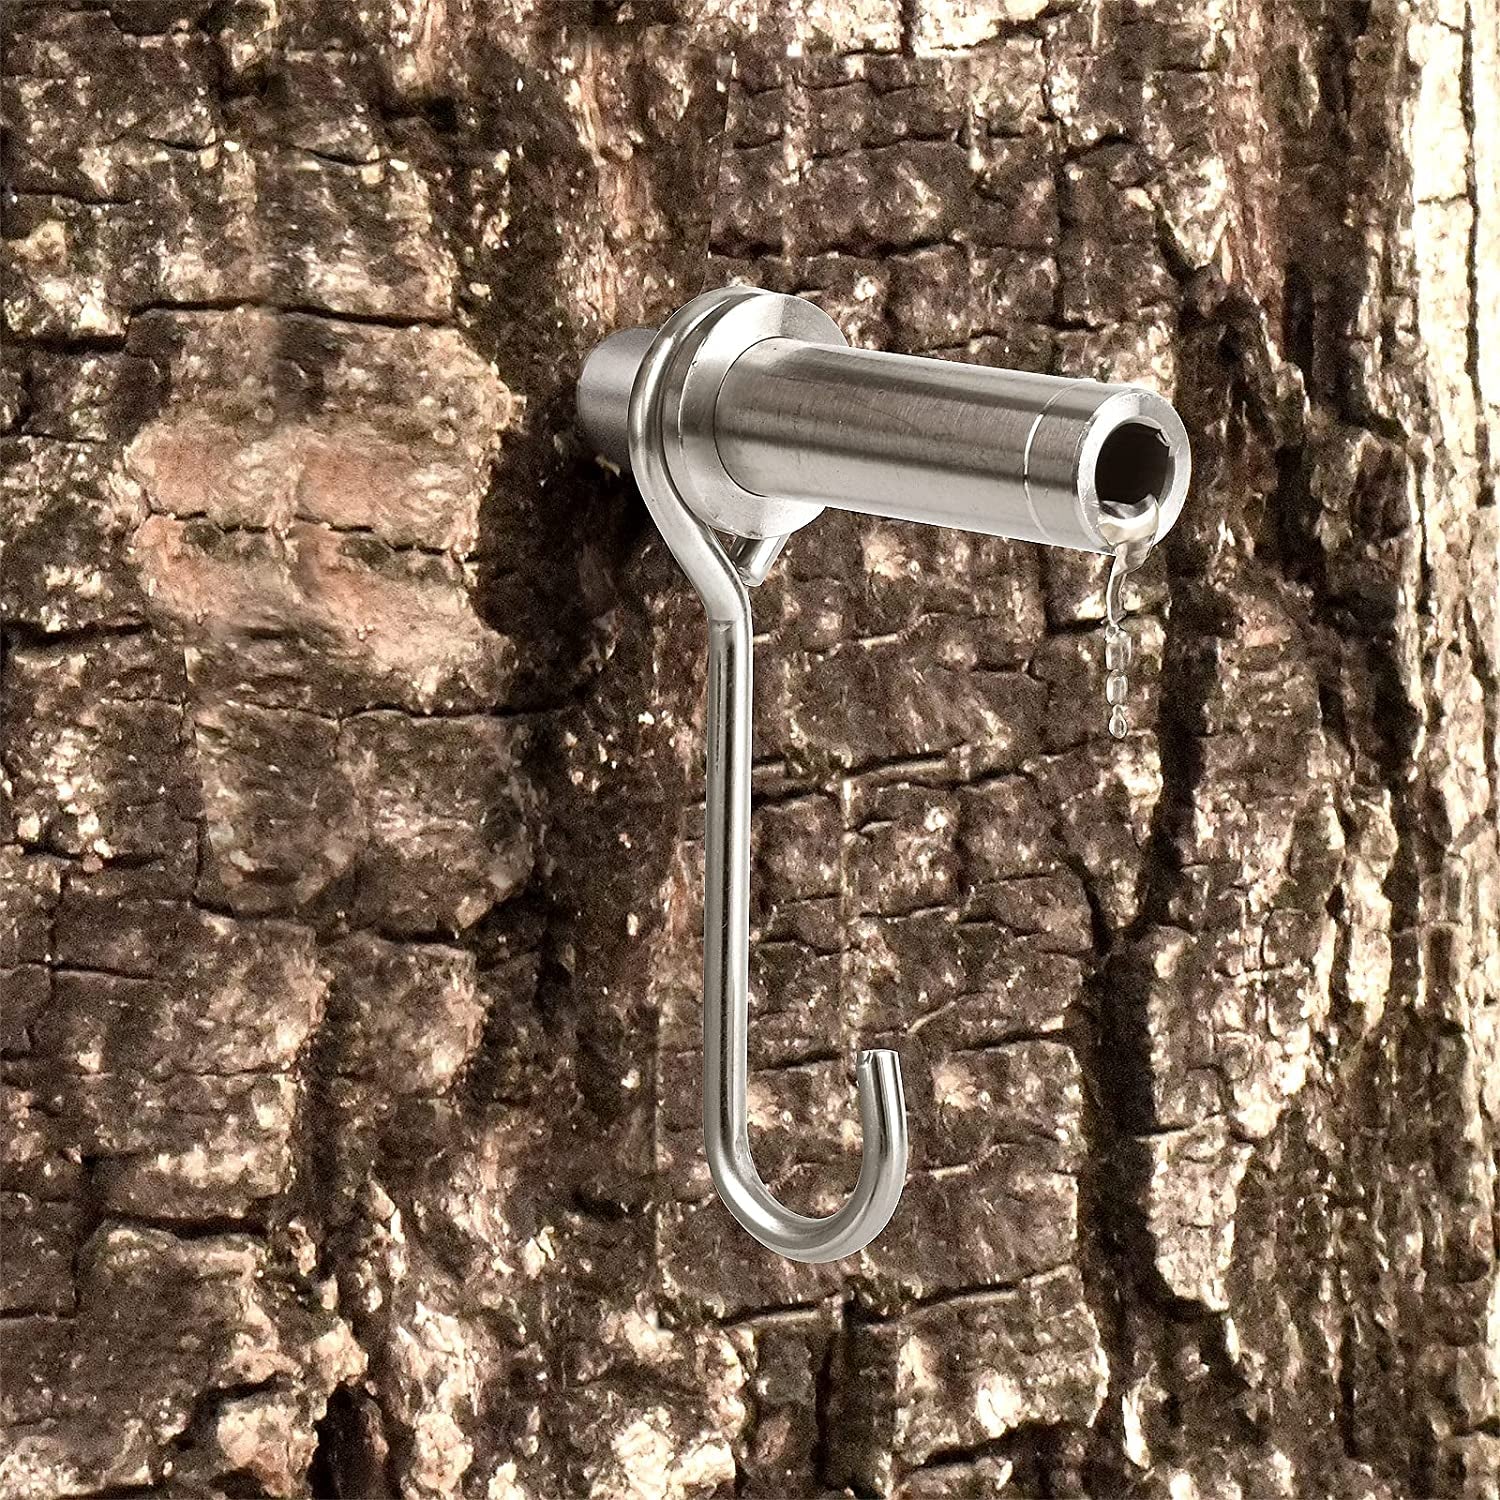 Maple Syrup Tapping Kit, Stainless Steel Maple Tree Taps Spiles for Making Maple Syrup, Tree Tapping Kit Maple Syrup Supplies(6 Pcs)